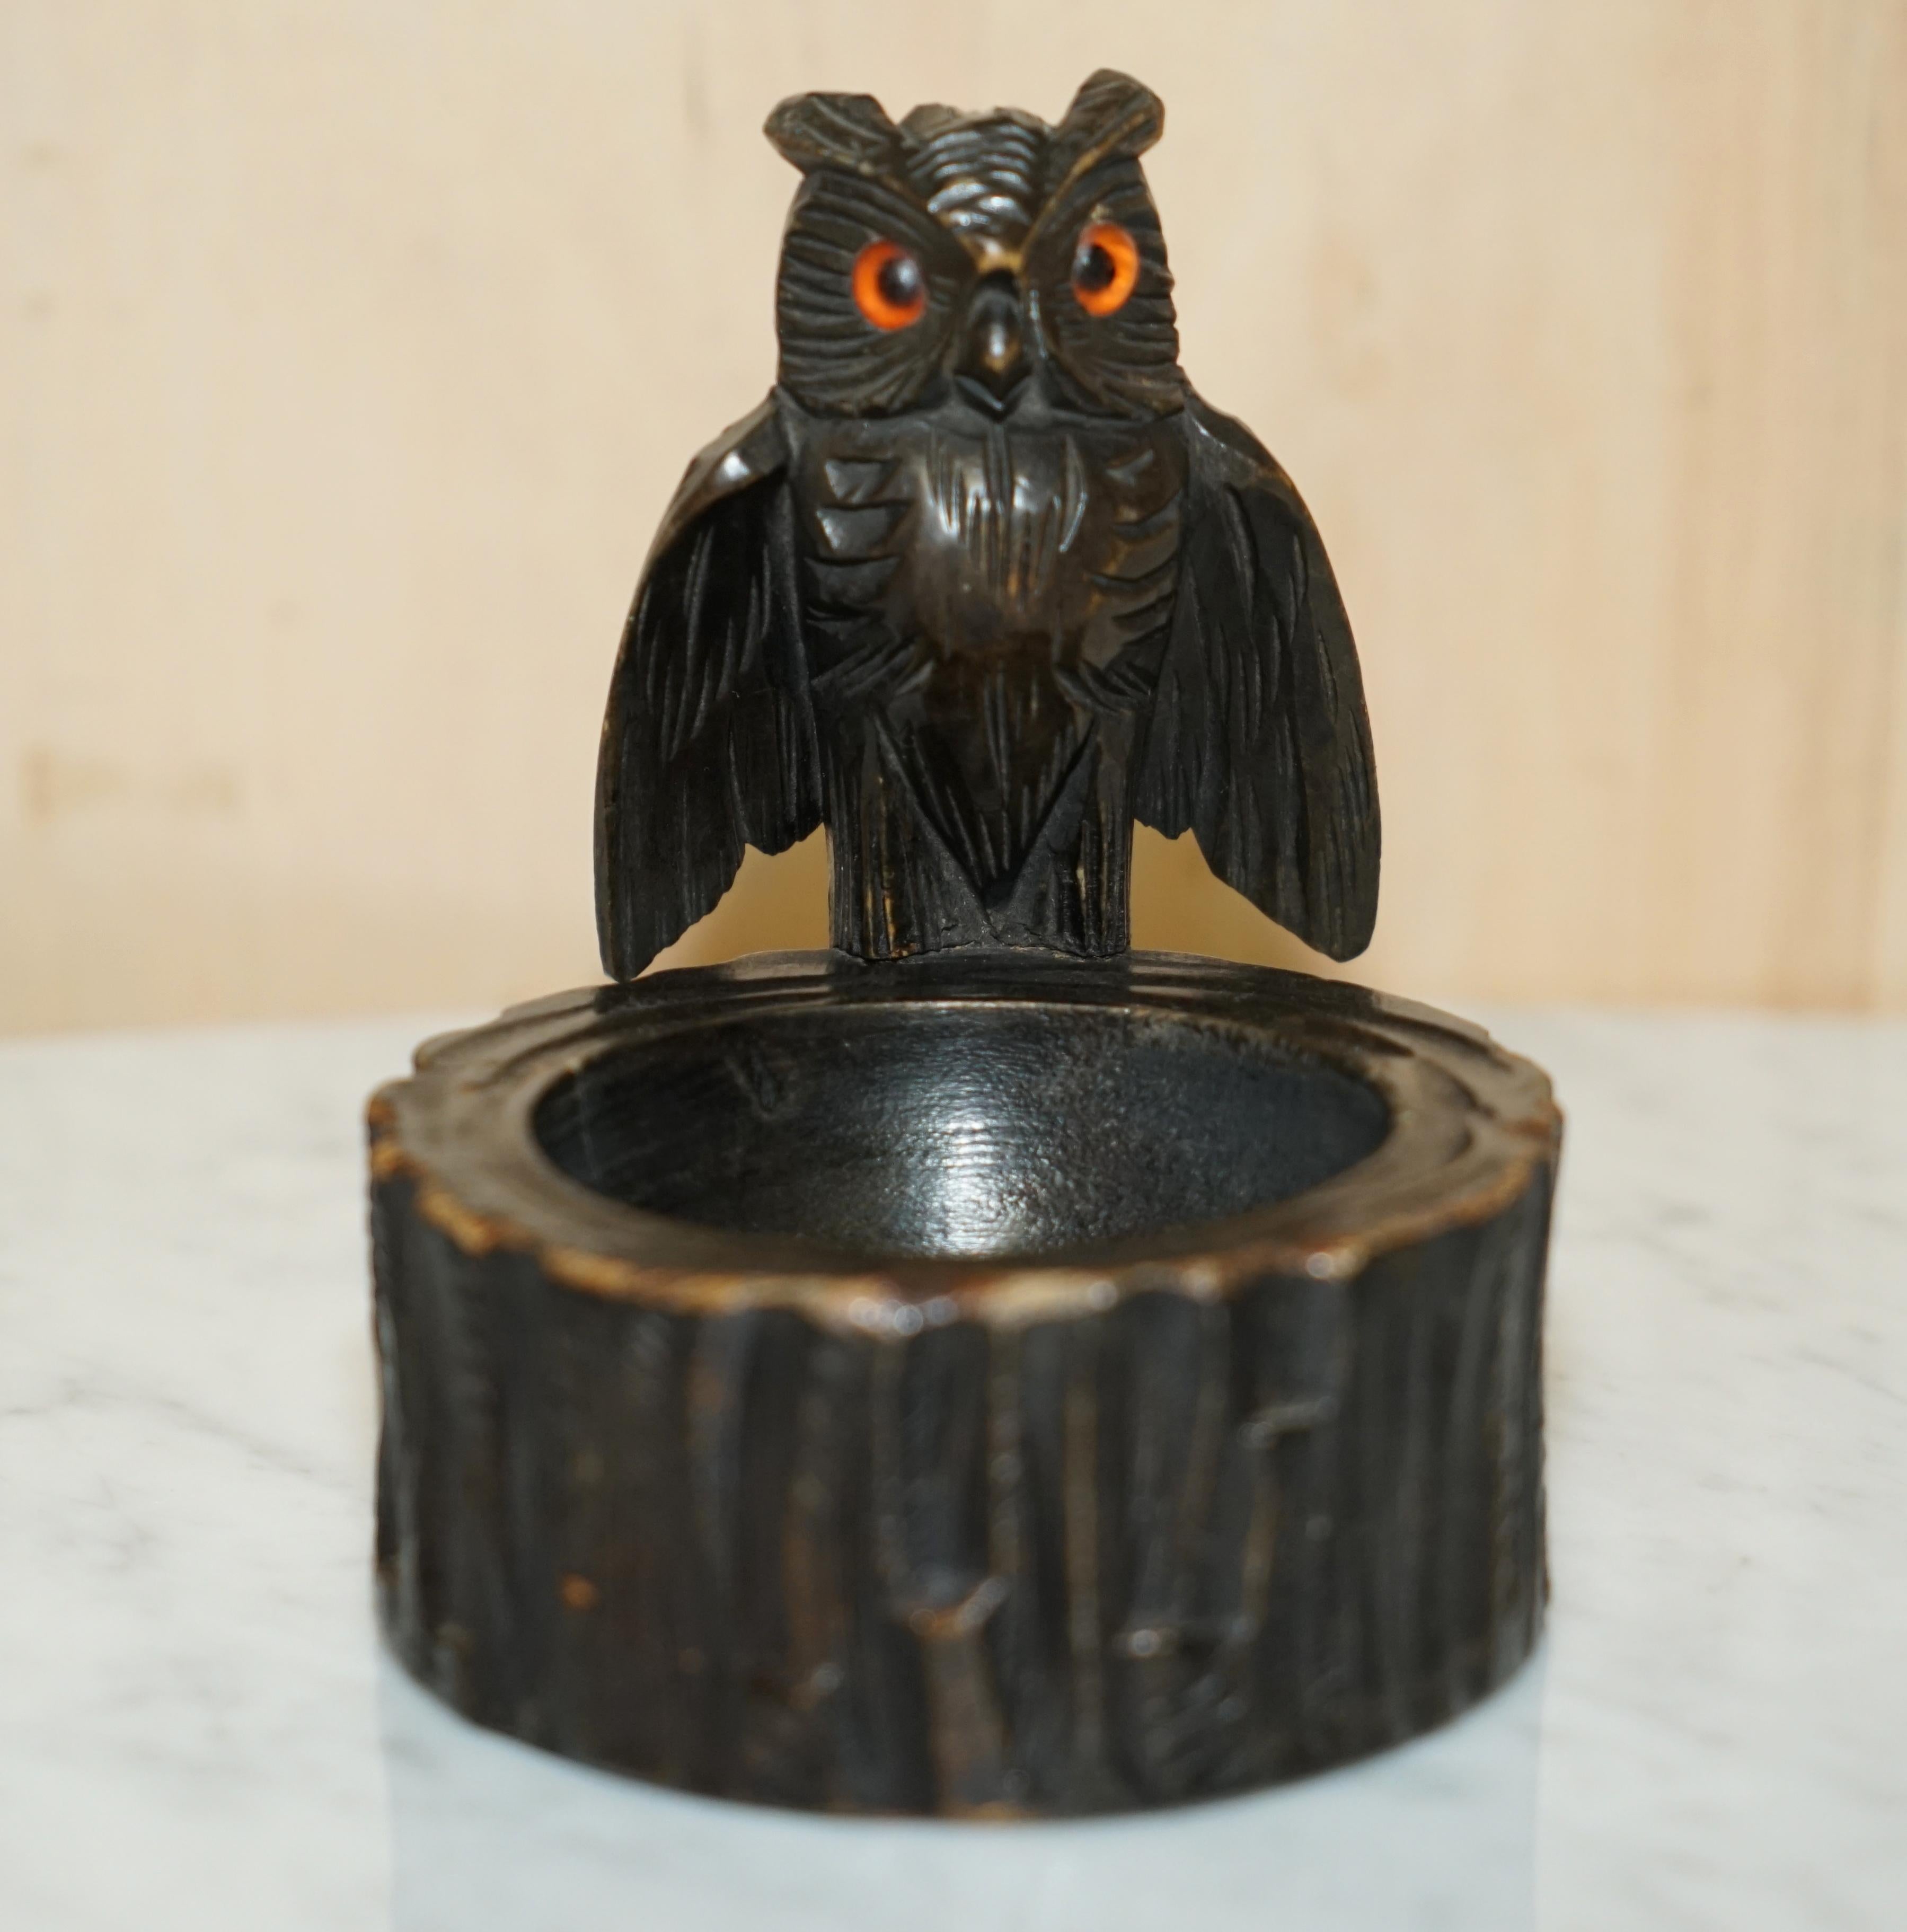 We are delighted to offer for sale this stunning suite of nine black forest wood carved owls

This is a ready made collection of rare antique & vintage black forest wood owls. You have included various match stick holders, an ashtray, ink pot and